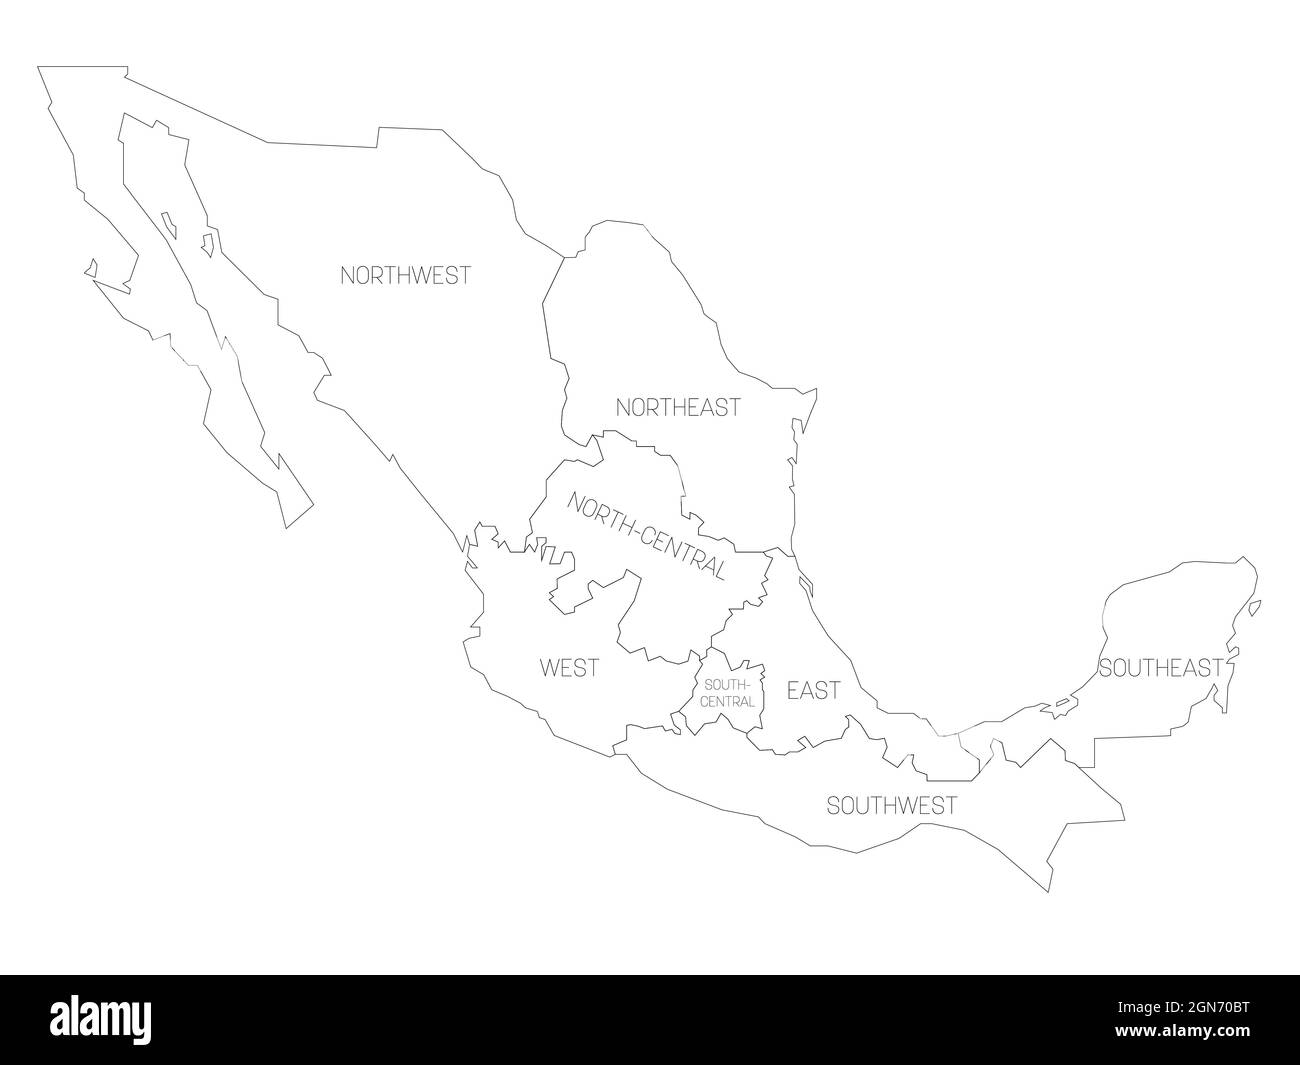 Political map of Mexico. Administrative divisions - regions. Simple flat black outline vector map with labels. Stock Vector